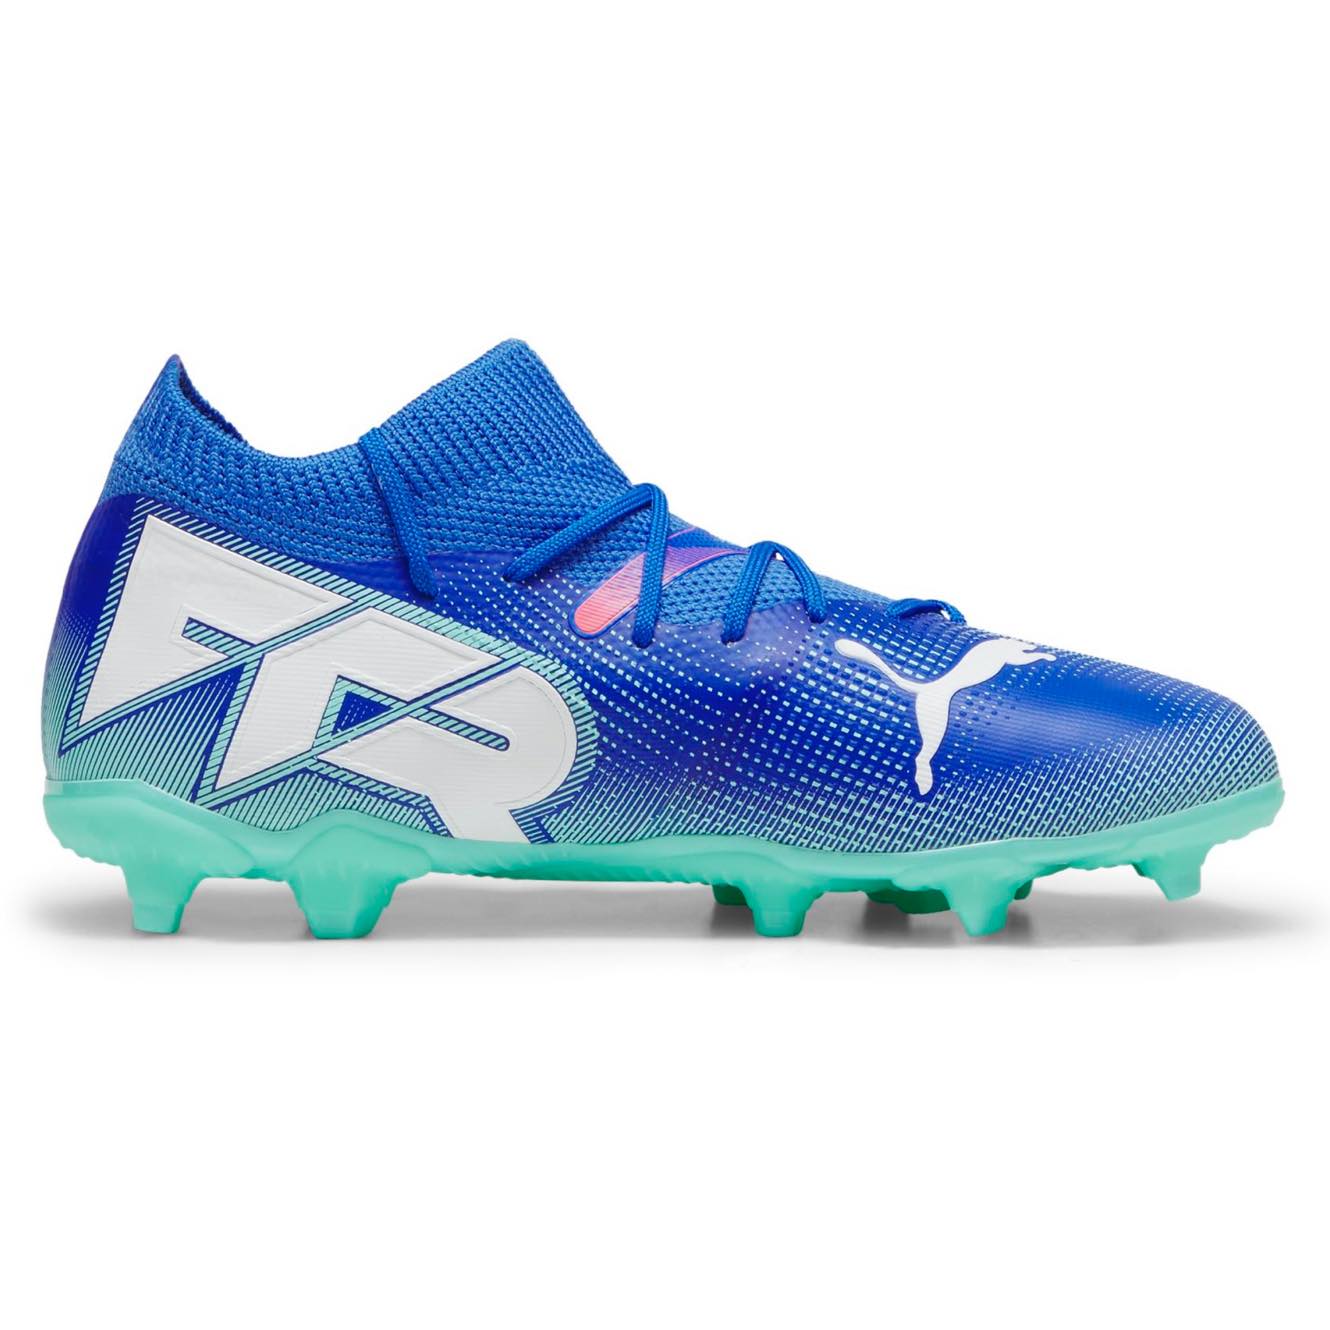 PUMA FUTURE 7 Match FG/AG Jr. soccer cleats with adaptive fit and superior traction